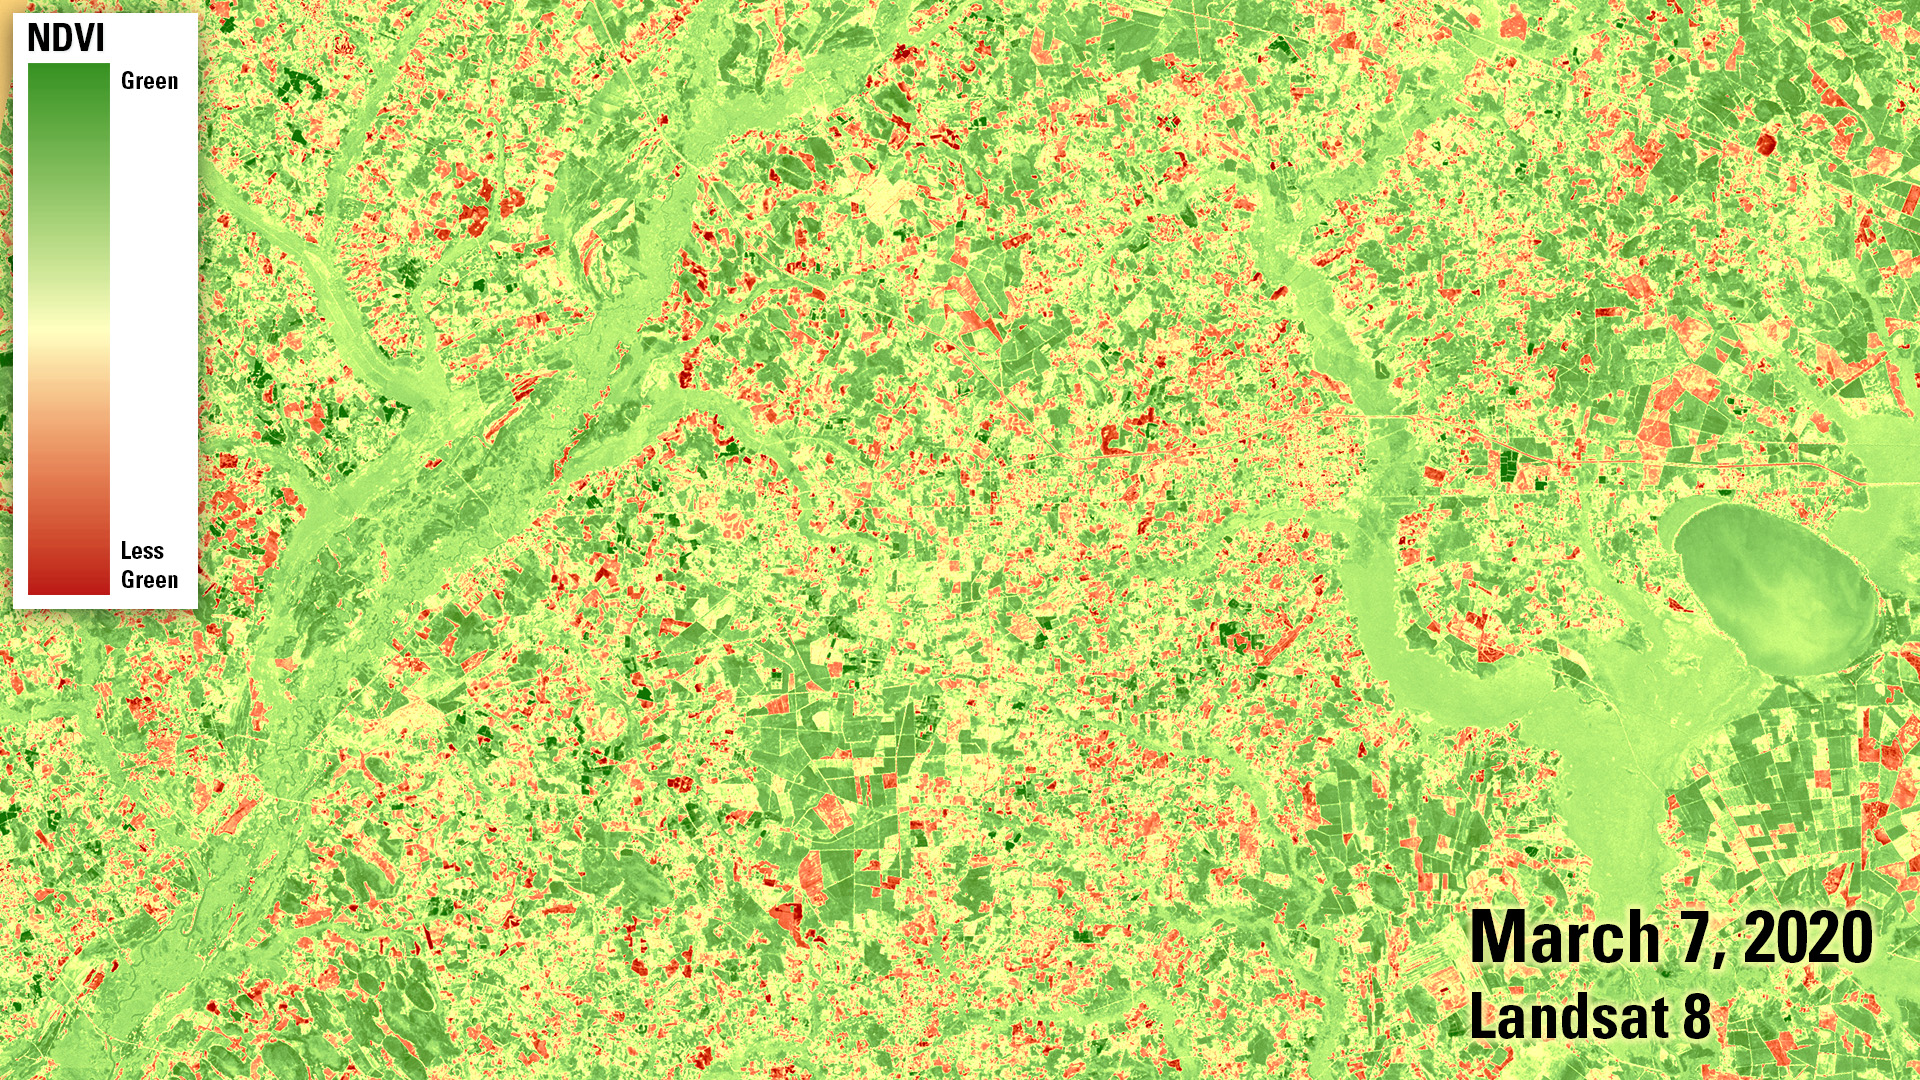 NDVI for March 2020